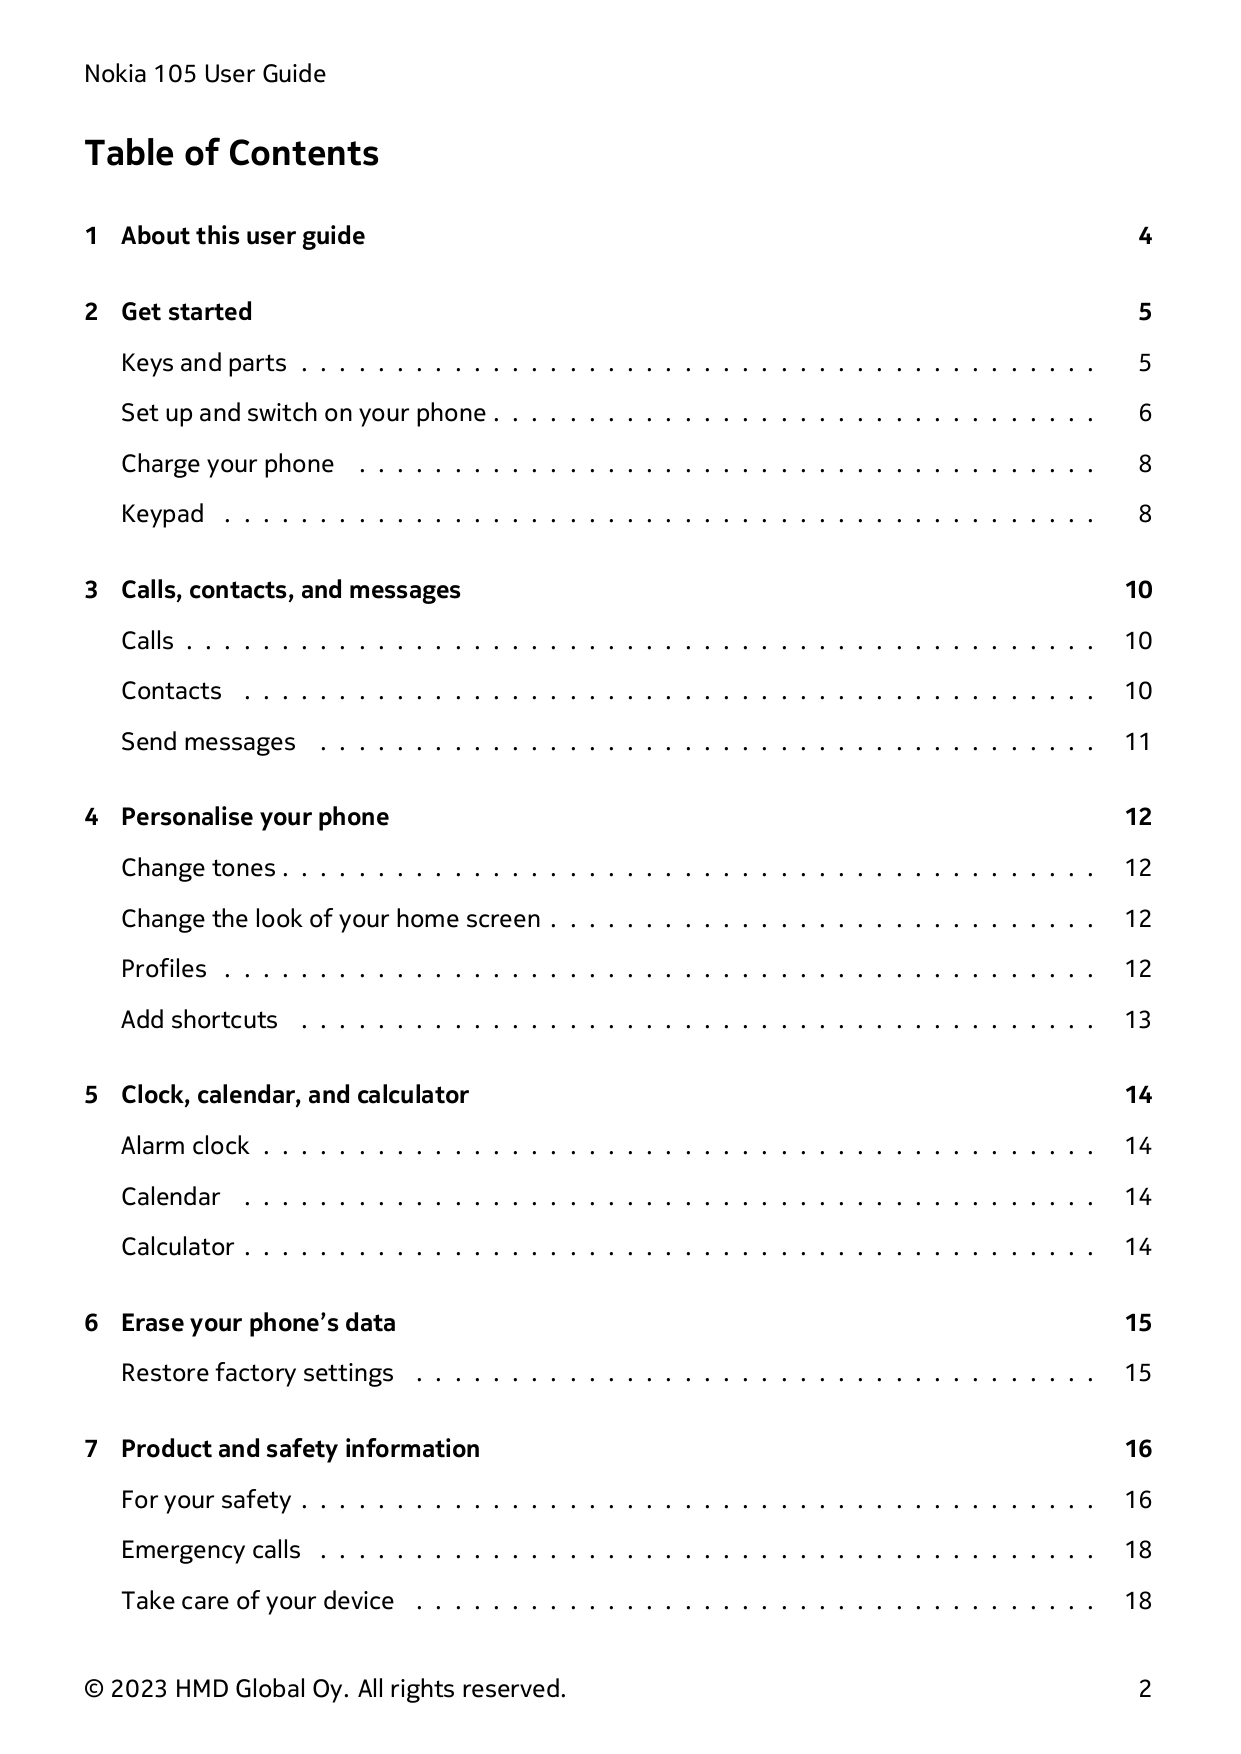 Nokia 105 User GuideTable of Contents1 About this user guide42 Get started5Keys and parts . . . . . . . . . . . . . . . . . . . 